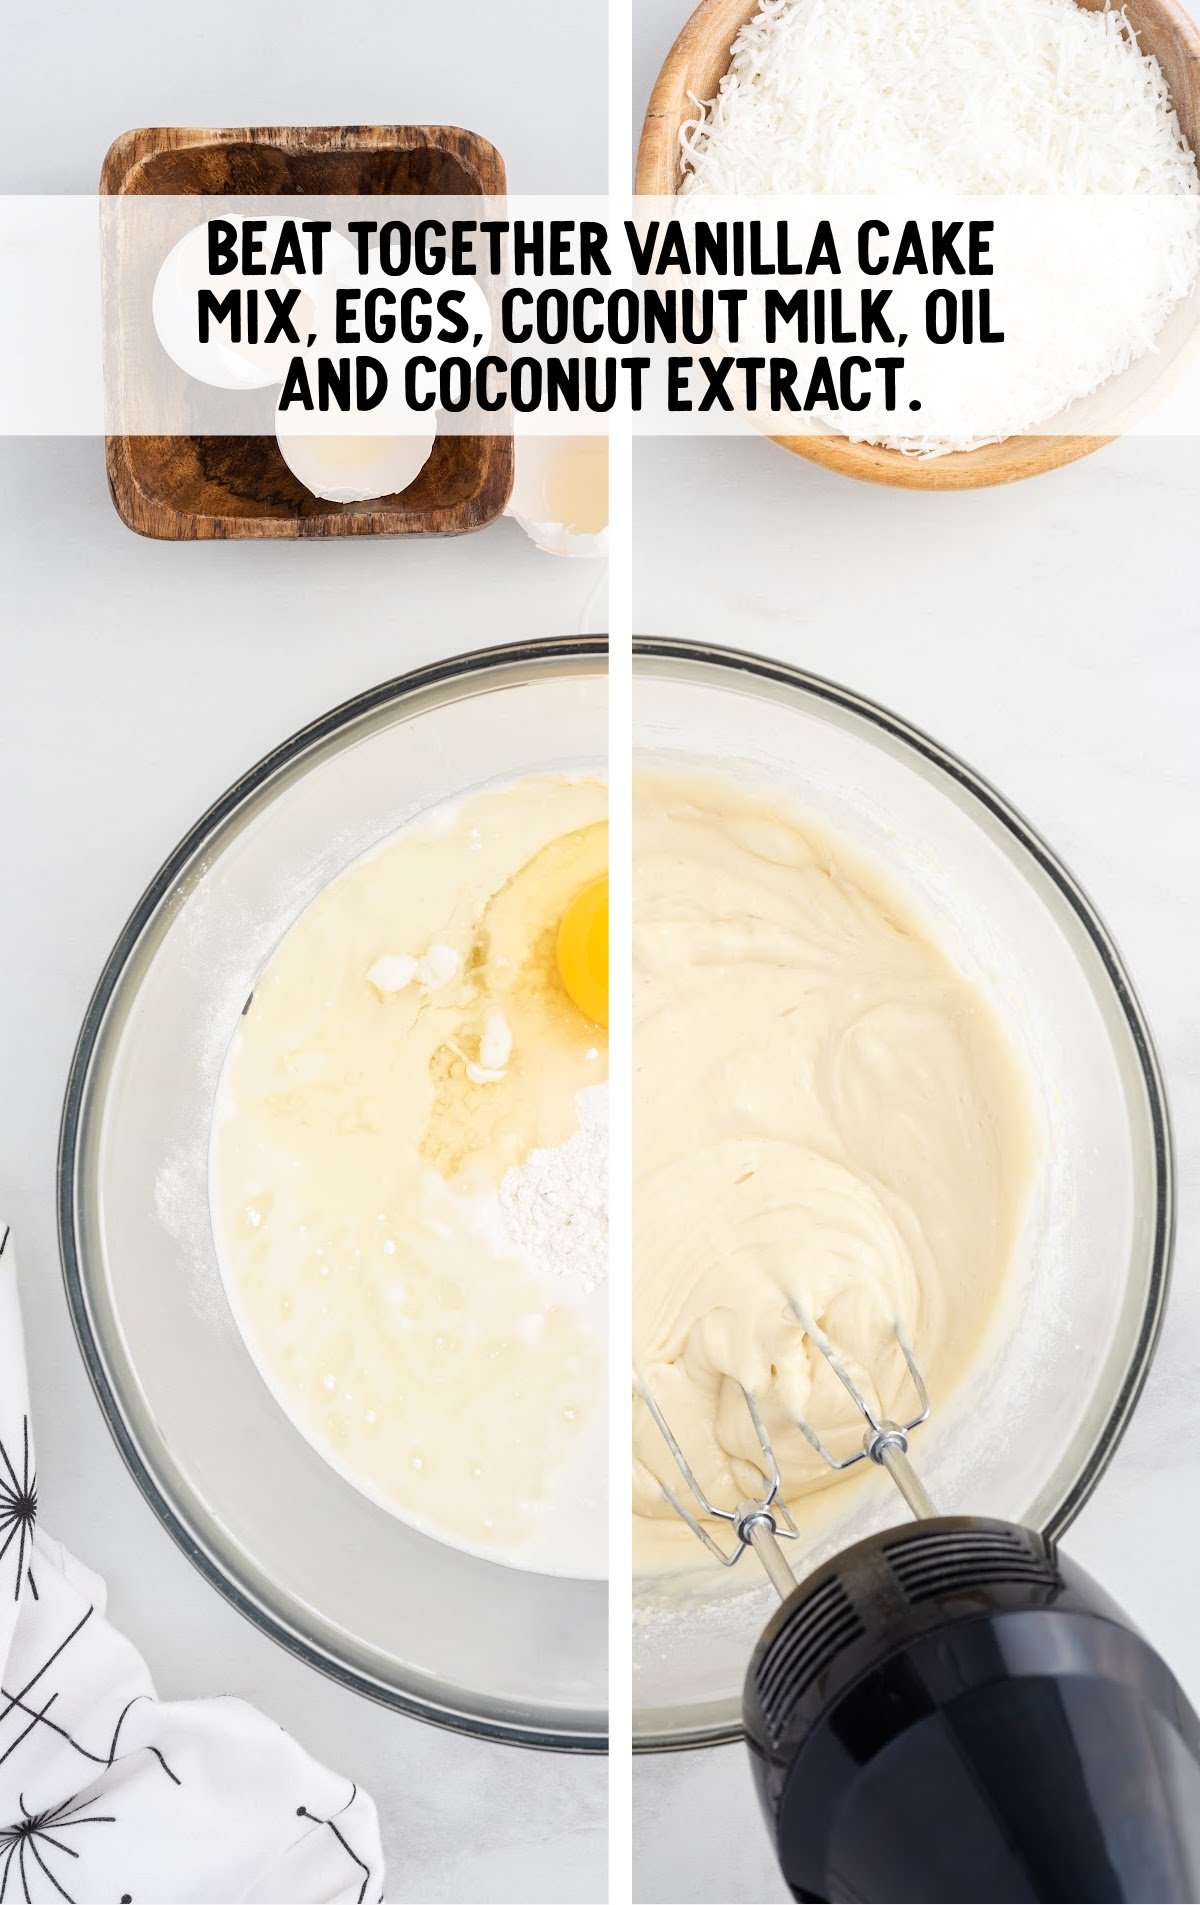 Vanilla cake mix, eggs, coconut milk oil and coconut extract blended together in a bowl